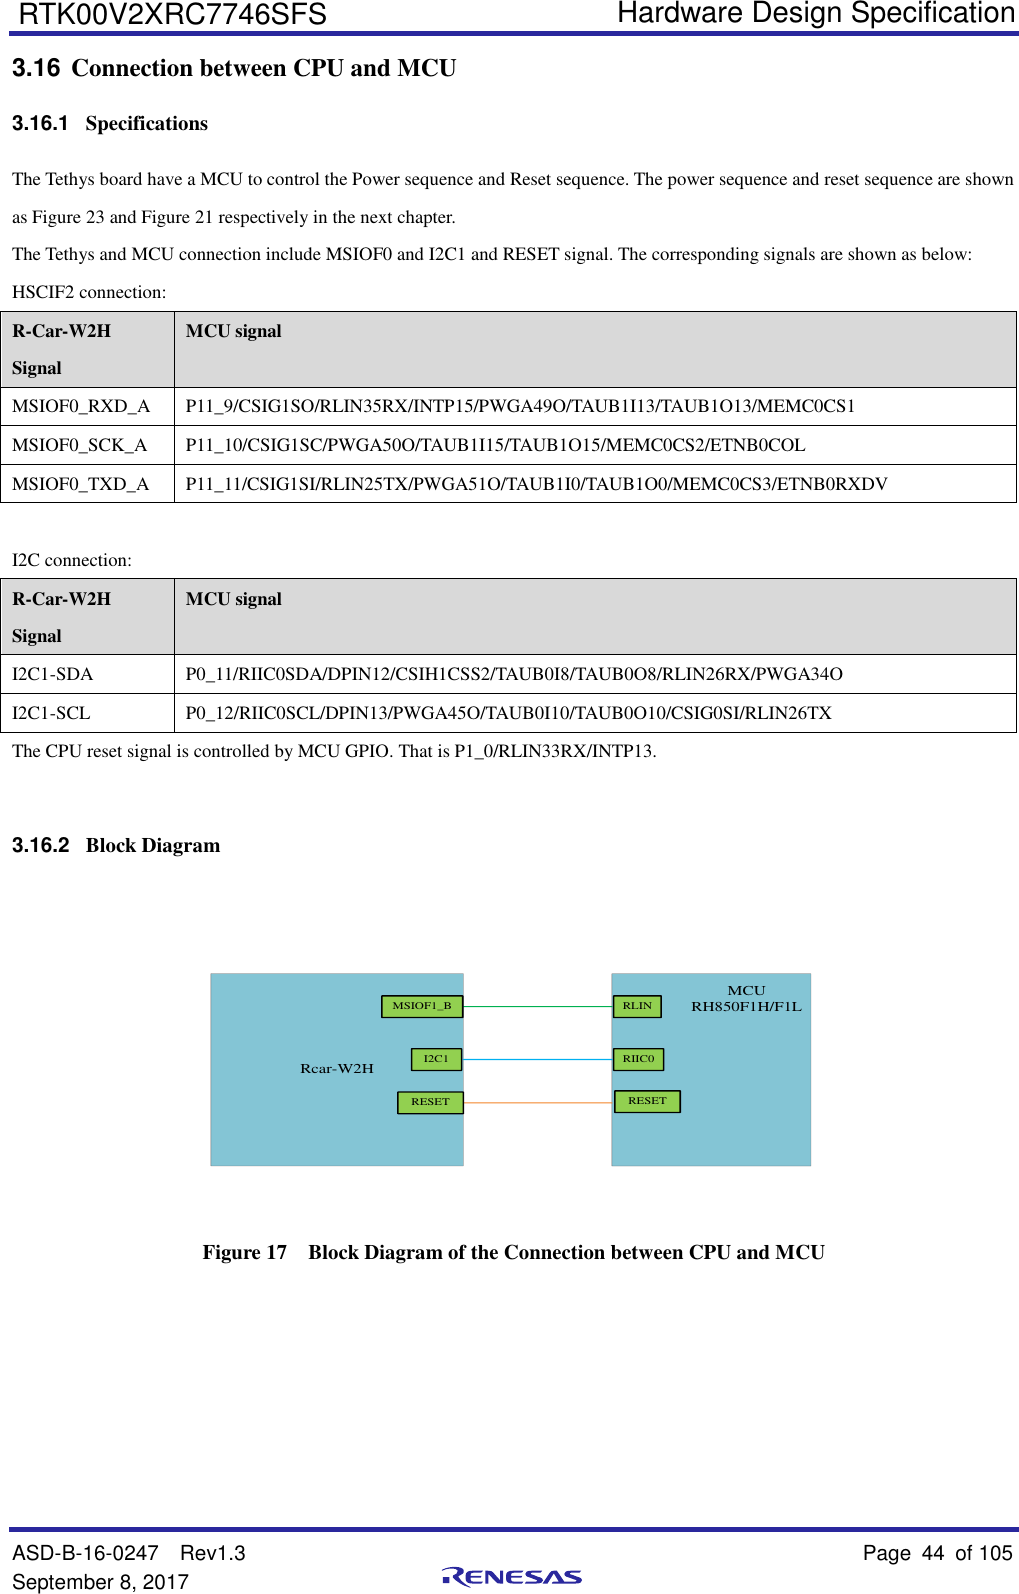   Hardware Design Specification ASD-B-16-0247  Rev1.3    Page 44  of 105 September 8, 2017      RTK00V2XRC7746SFS 3.16 Connection between CPU and MCU 3.16.1  Specifications The Tethys board have a MCU to control the Power sequence and Reset sequence. The power sequence and reset sequence are shown as Figure 23 and Figure 21 respectively in the next chapter. The Tethys and MCU connection include MSIOF0 and I2C1 and RESET signal. The corresponding signals are shown as below: HSCIF2 connection: R-Car-W2H Signal MCU signal MSIOF0_RXD_A P11_9/CSIG1SO/RLIN35RX/INTP15/PWGA49O/TAUB1I13/TAUB1O13/MEMC0CS1 MSIOF0_SCK_A P11_10/CSIG1SC/PWGA50O/TAUB1I15/TAUB1O15/MEMC0CS2/ETNB0COL MSIOF0_TXD_A P11_11/CSIG1SI/RLIN25TX/PWGA51O/TAUB1I0/TAUB1O0/MEMC0CS3/ETNB0RXDV  I2C connection: R-Car-W2H Signal MCU signal I2C1-SDA P0_11/RIIC0SDA/DPIN12/CSIH1CSS2/TAUB0I8/TAUB0O8/RLIN26RX/PWGA34O I2C1-SCL P0_12/RIIC0SCL/DPIN13/PWGA45O/TAUB0I10/TAUB0O10/CSIG0SI/RLIN26TX The CPU reset signal is controlled by MCU GPIO. That is P1_0/RLIN33RX/INTP13.  3.16.2  Block Diagram   Rcar-W2HMSIOFI2C1RESETMSIOF1_BI2C1RESETMCURH850F1H/F1LRIIC0RESETRLIN      Figure 17  Block Diagram of the Connection between CPU and MCU      